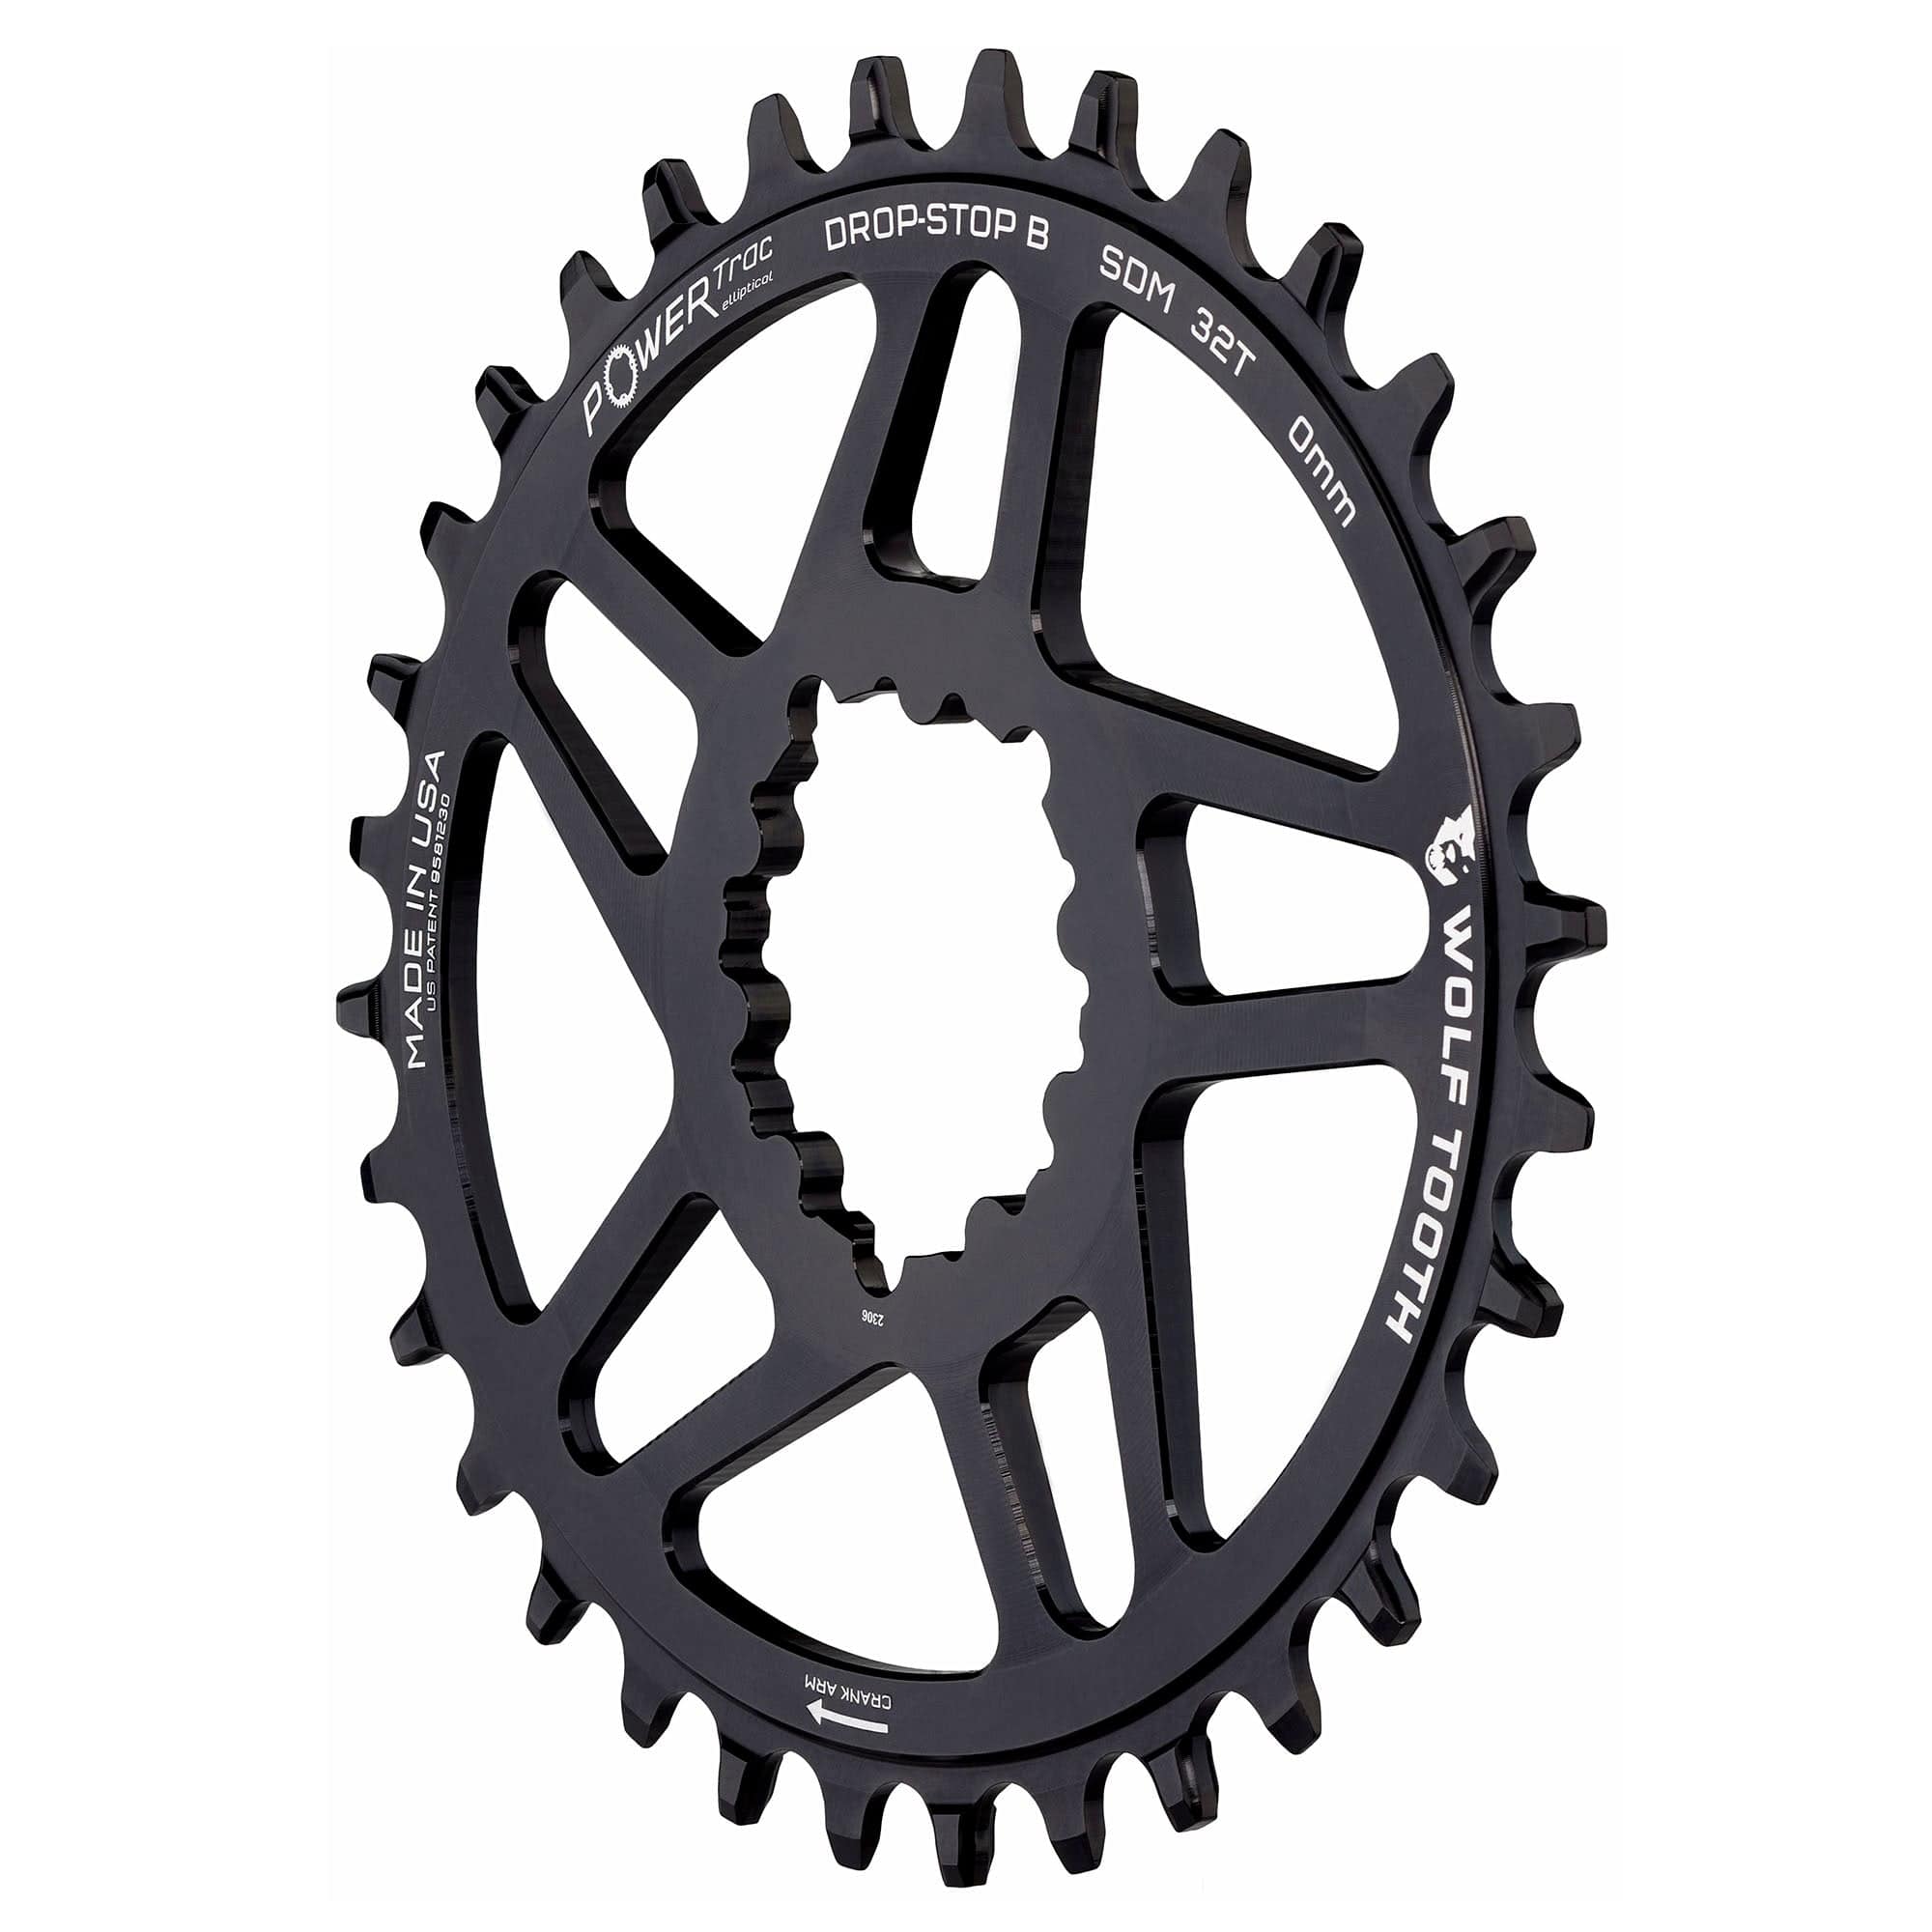 Wolftooth Direct Mount Chainring for Shimano Crank Drop-Stop ST 30T Boost  (52mm chainline/3mm offset)